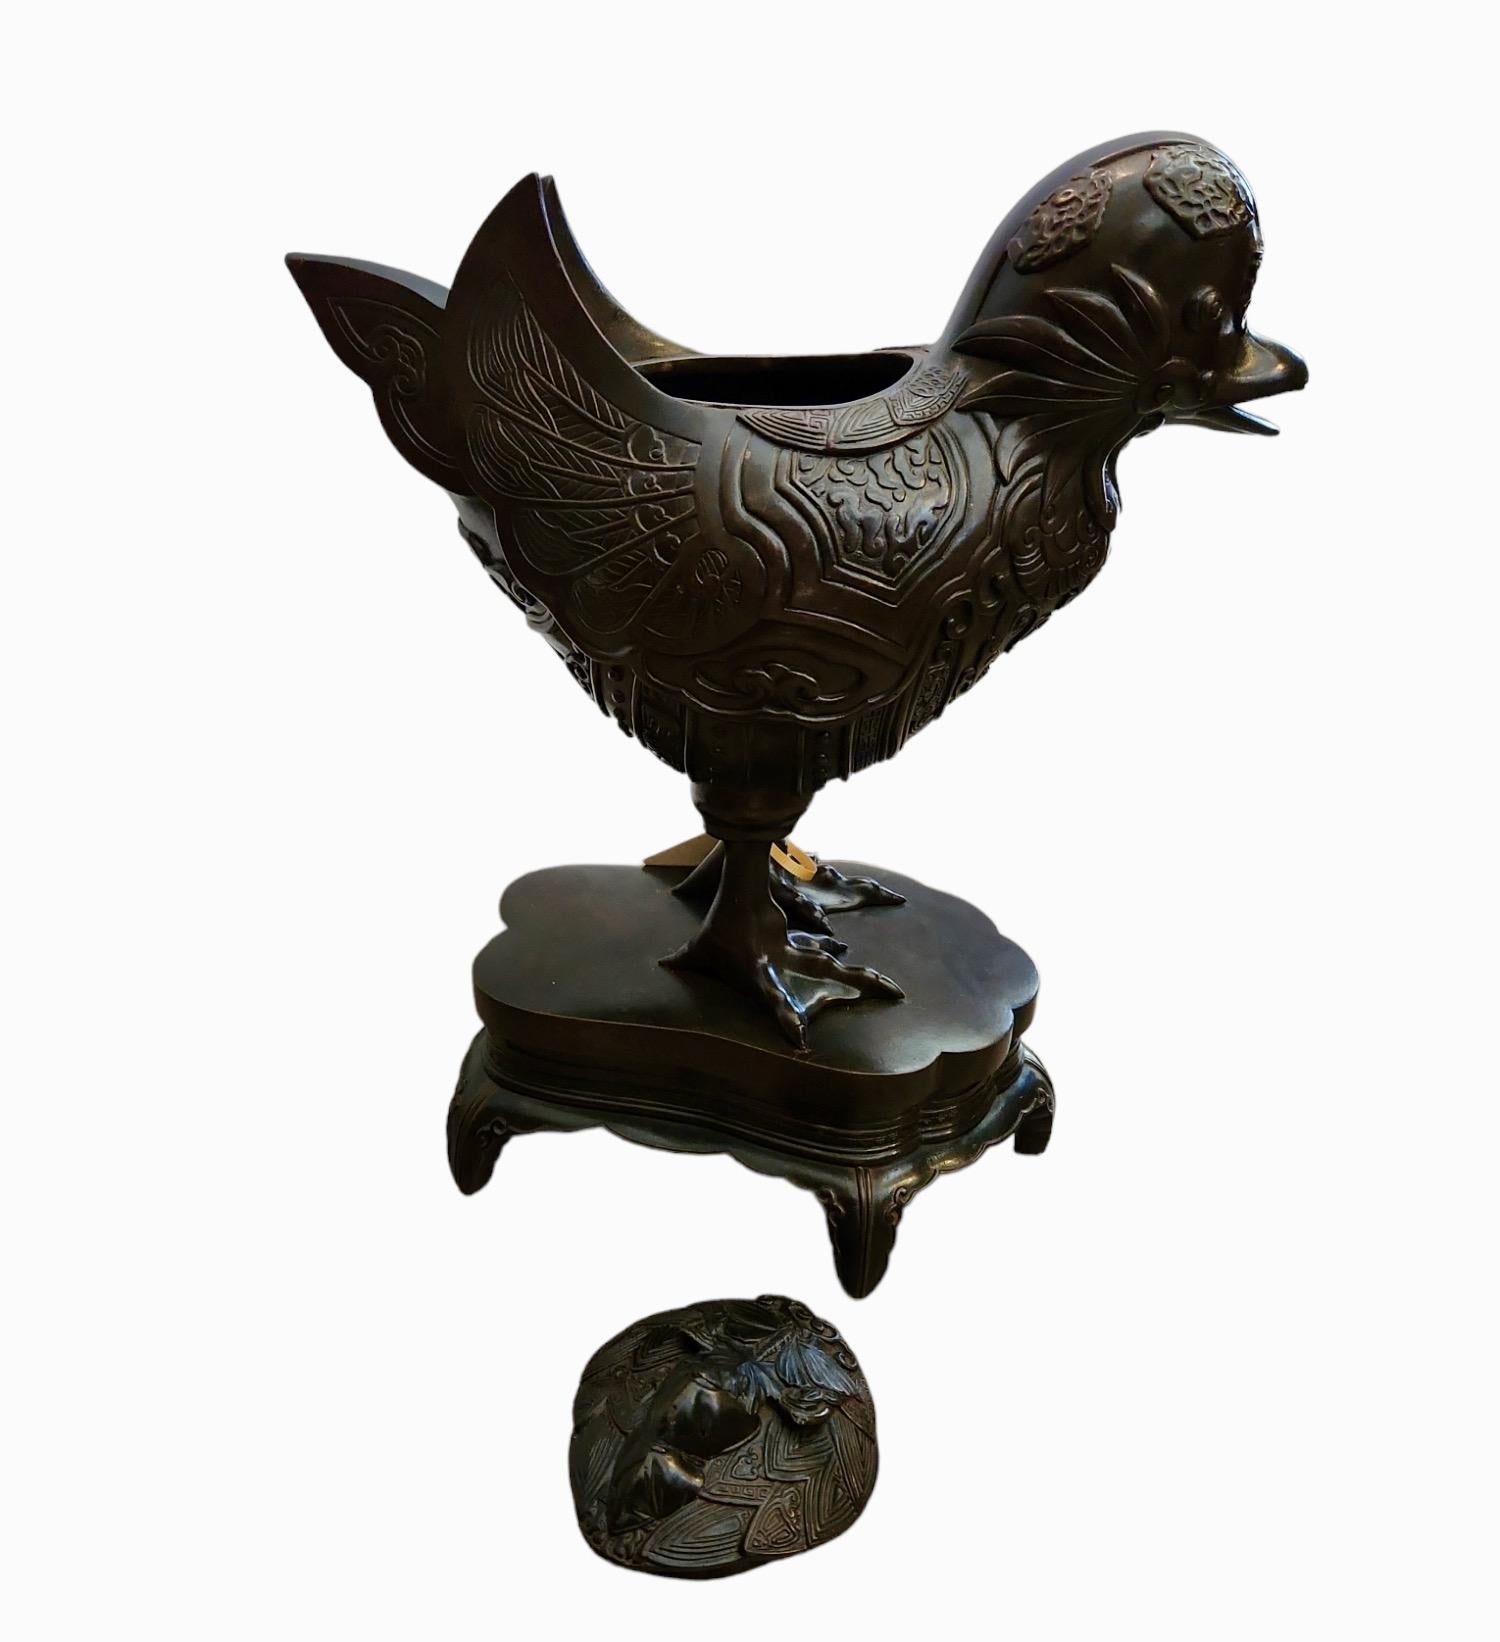 Beautifully chased 19th century bronze. In three parts. Great as just a table sculpture.